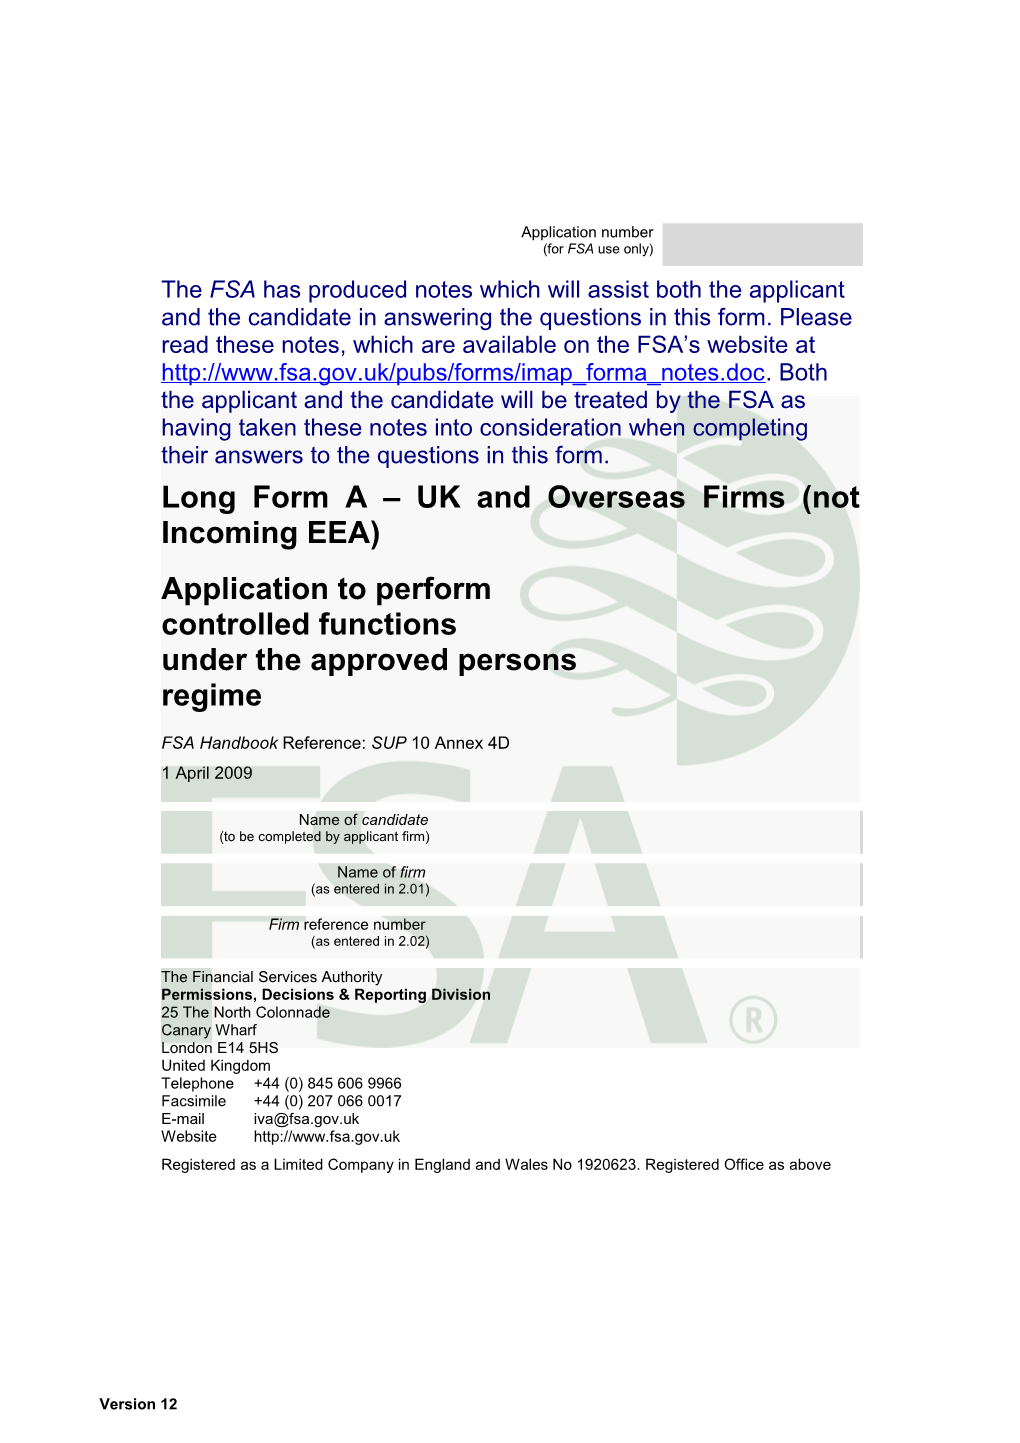 Long Form a - UK and Overseas Firms (Not Incoming EEA): Application to Perform Controlled